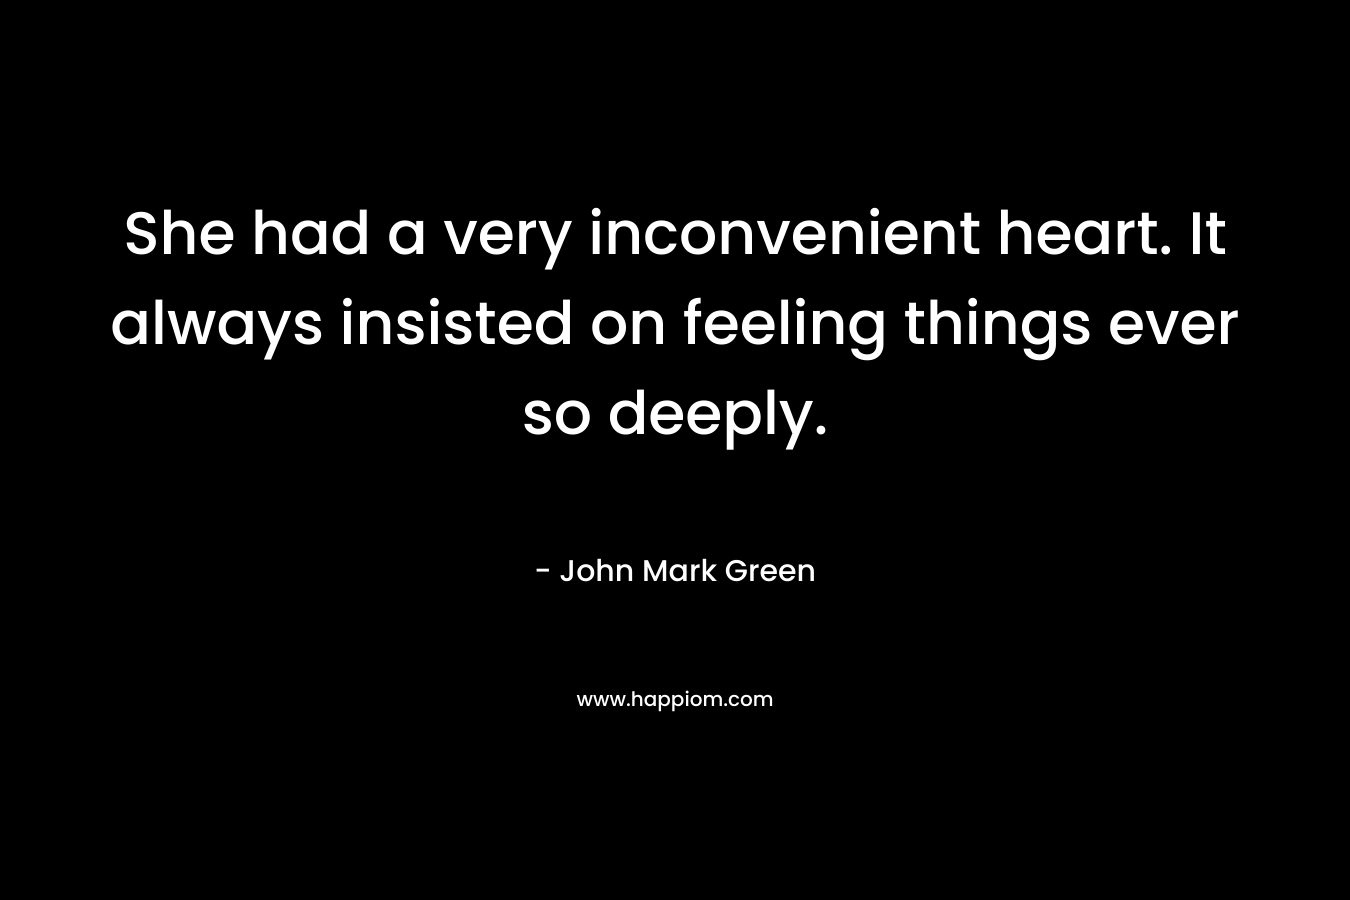 She had a very inconvenient heart. It always insisted on feeling things ever so deeply. – John Mark Green